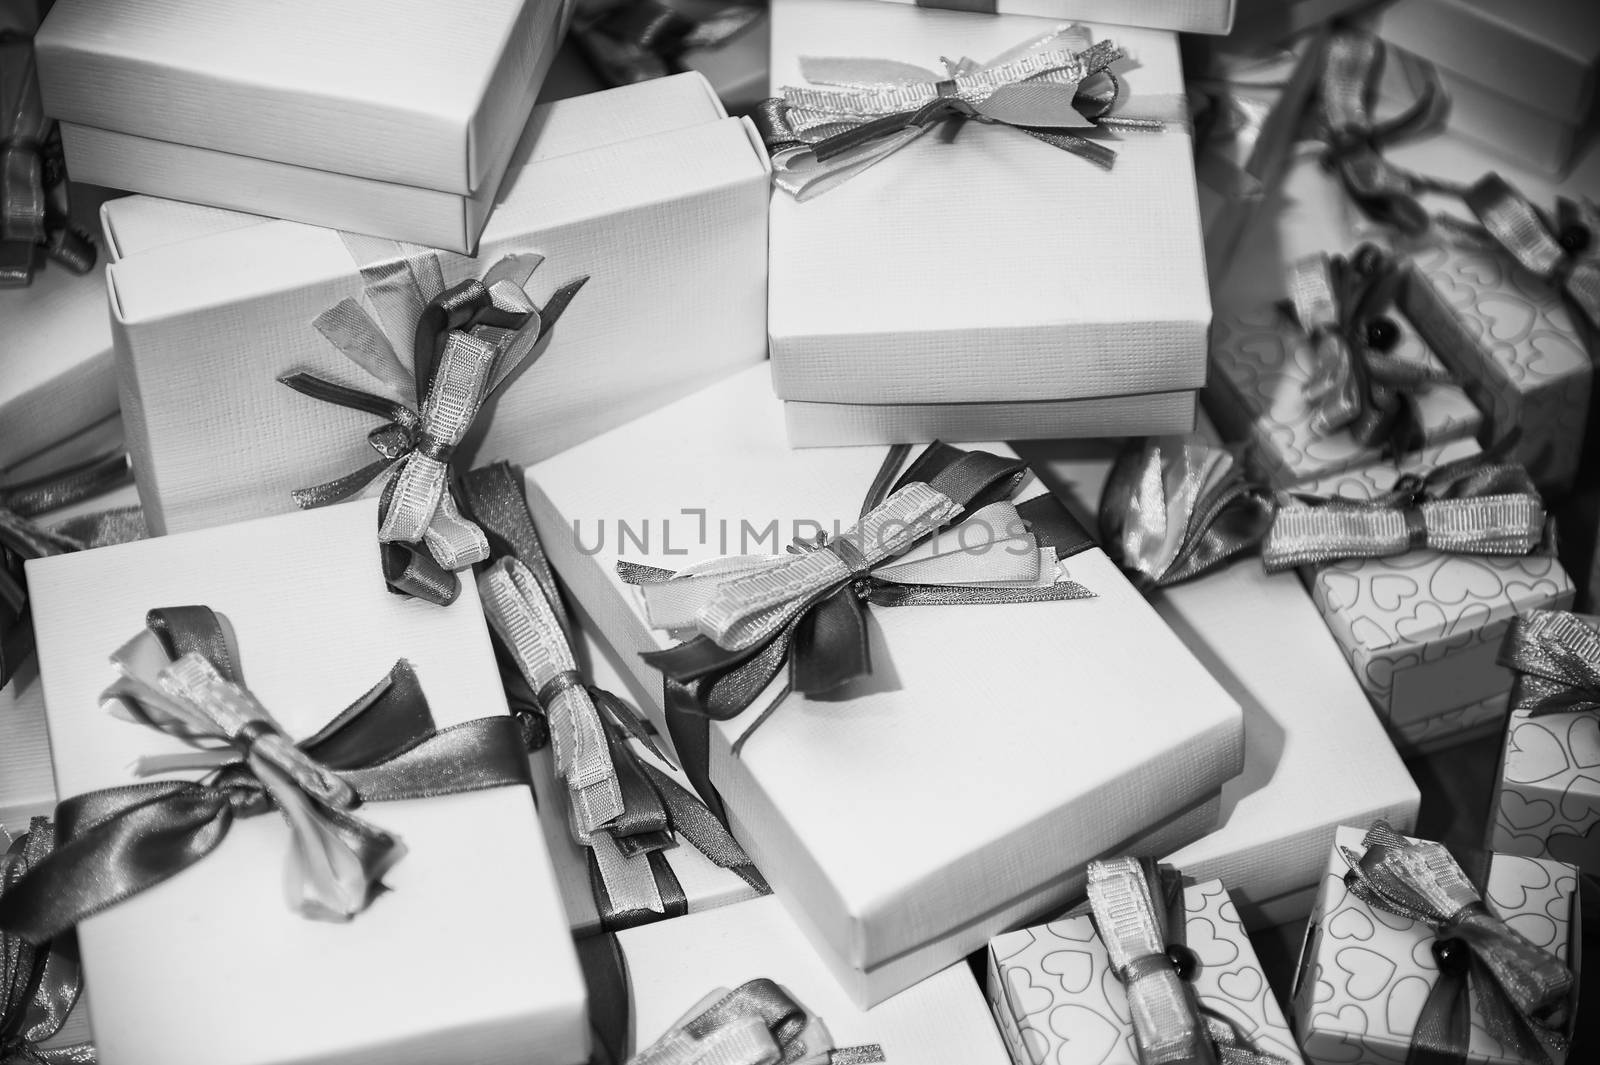 Black and white image of gifts pile with ribbons